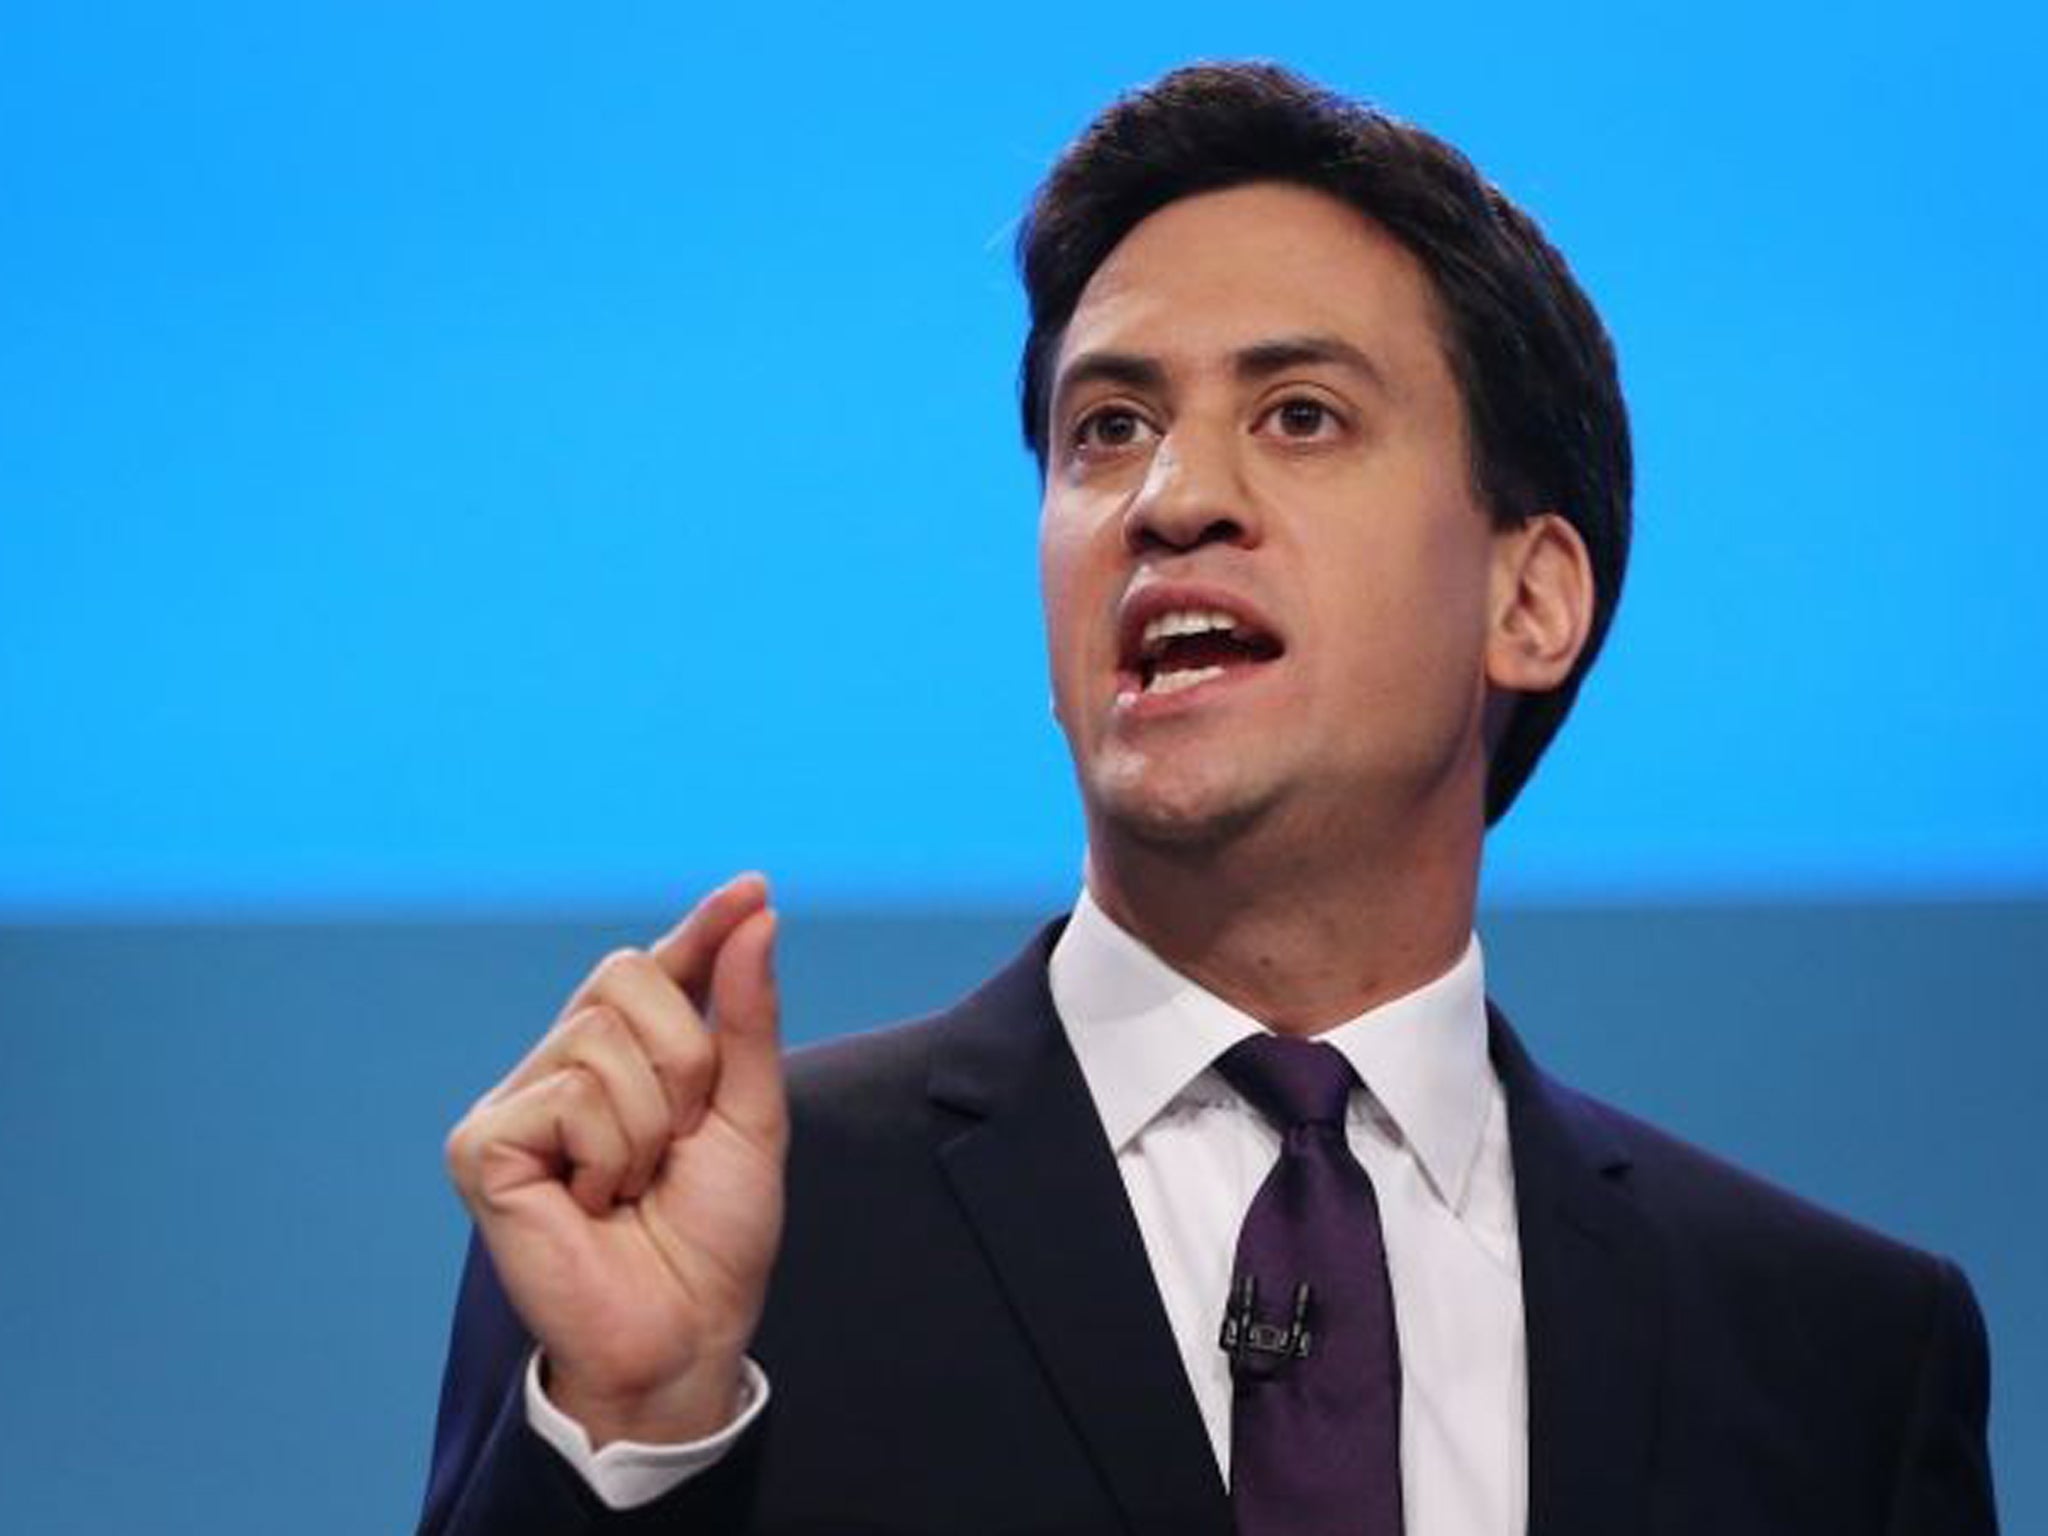 Ed Miliband has put pressure on companies with his 'big freeze' promise